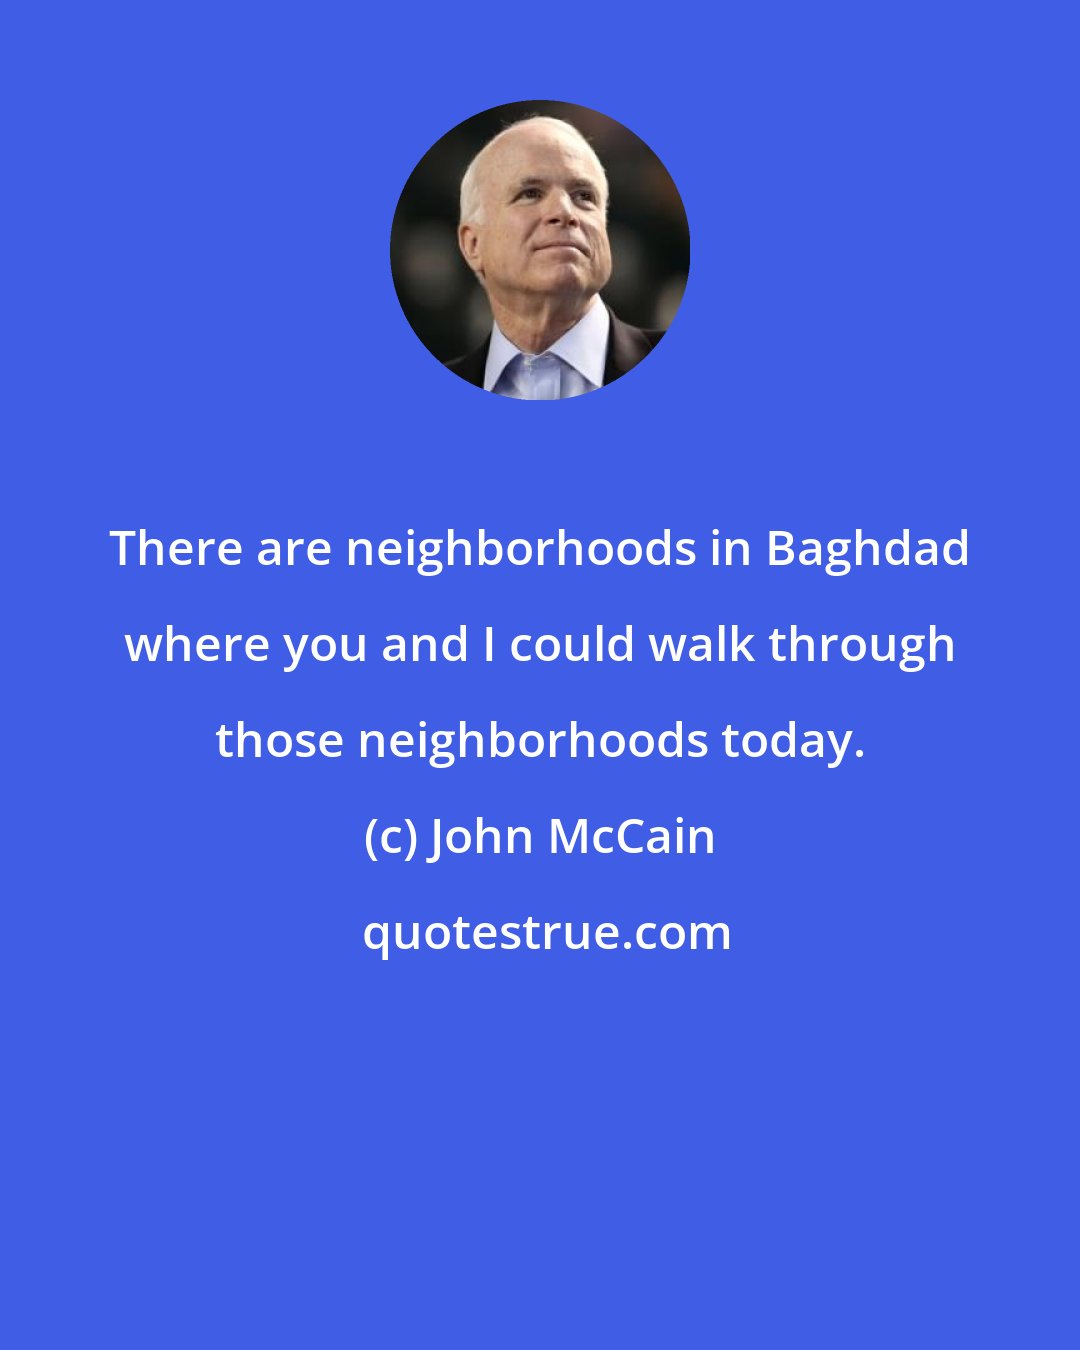 John McCain: There are neighborhoods in Baghdad where you and I could walk through those neighborhoods today.